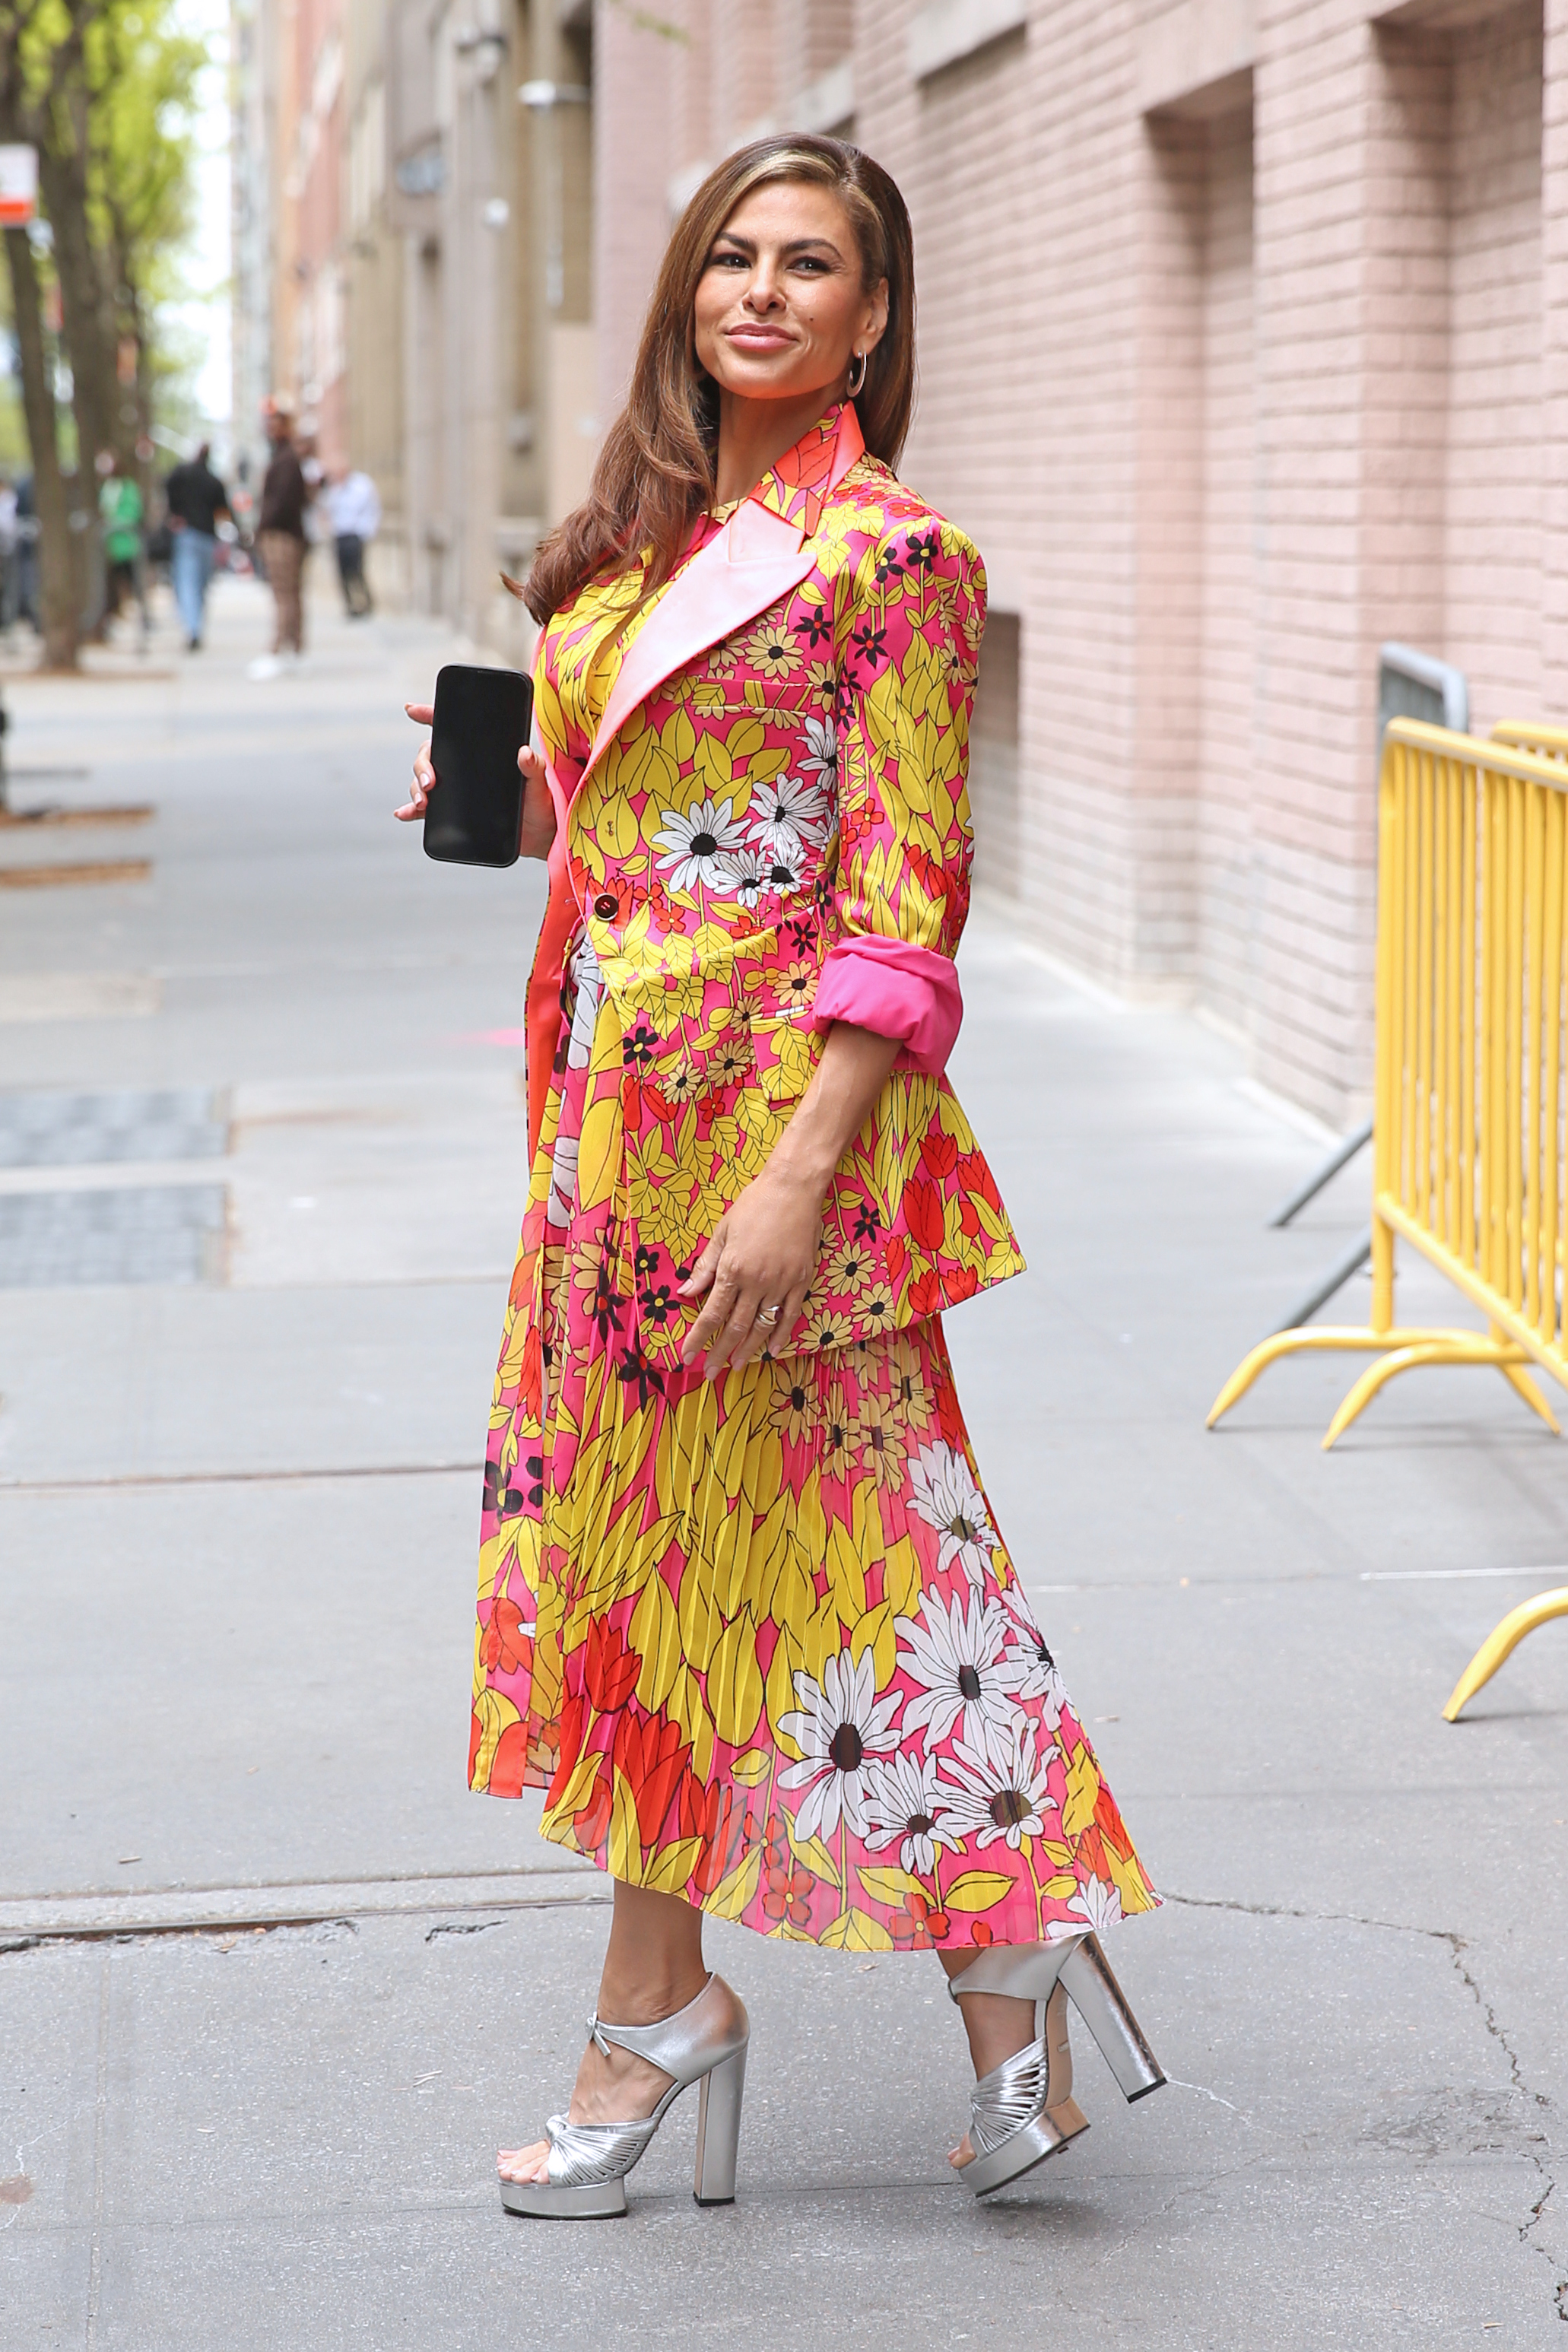 Paparazzi "caught" on the street Eva Mendes in a bright outfit